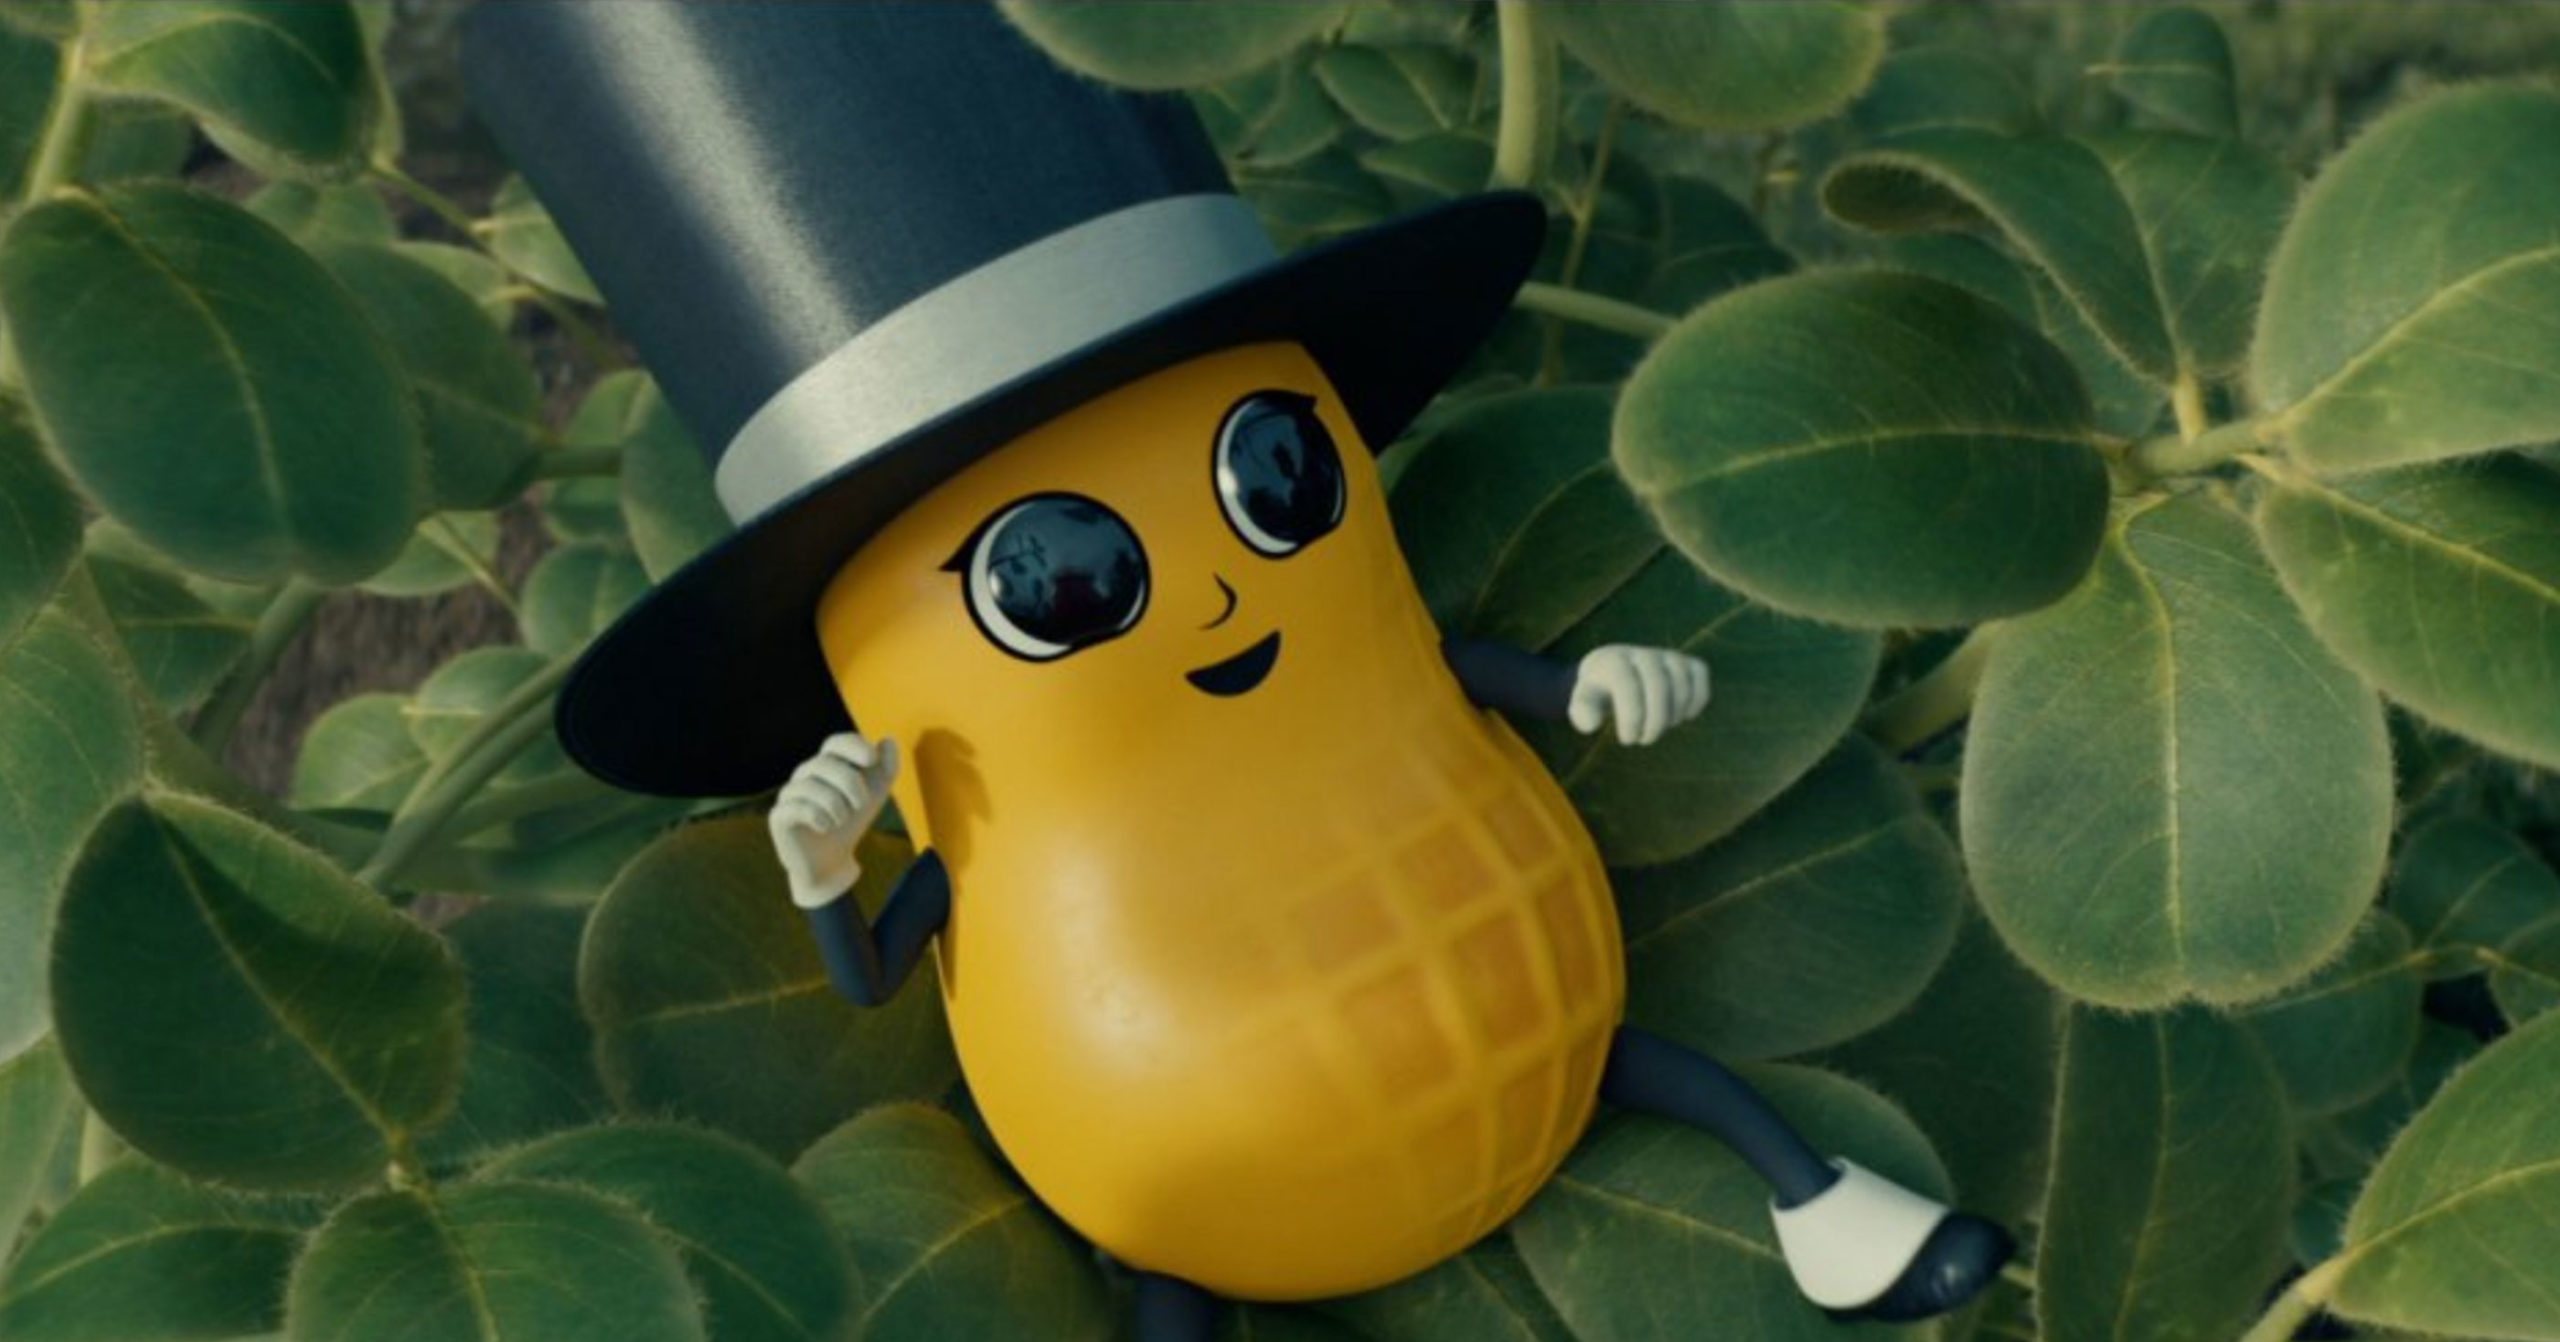 Mr. Peanut Is Reborn As Baby Nut In Planters Super Bowl Commercial (WATCH)